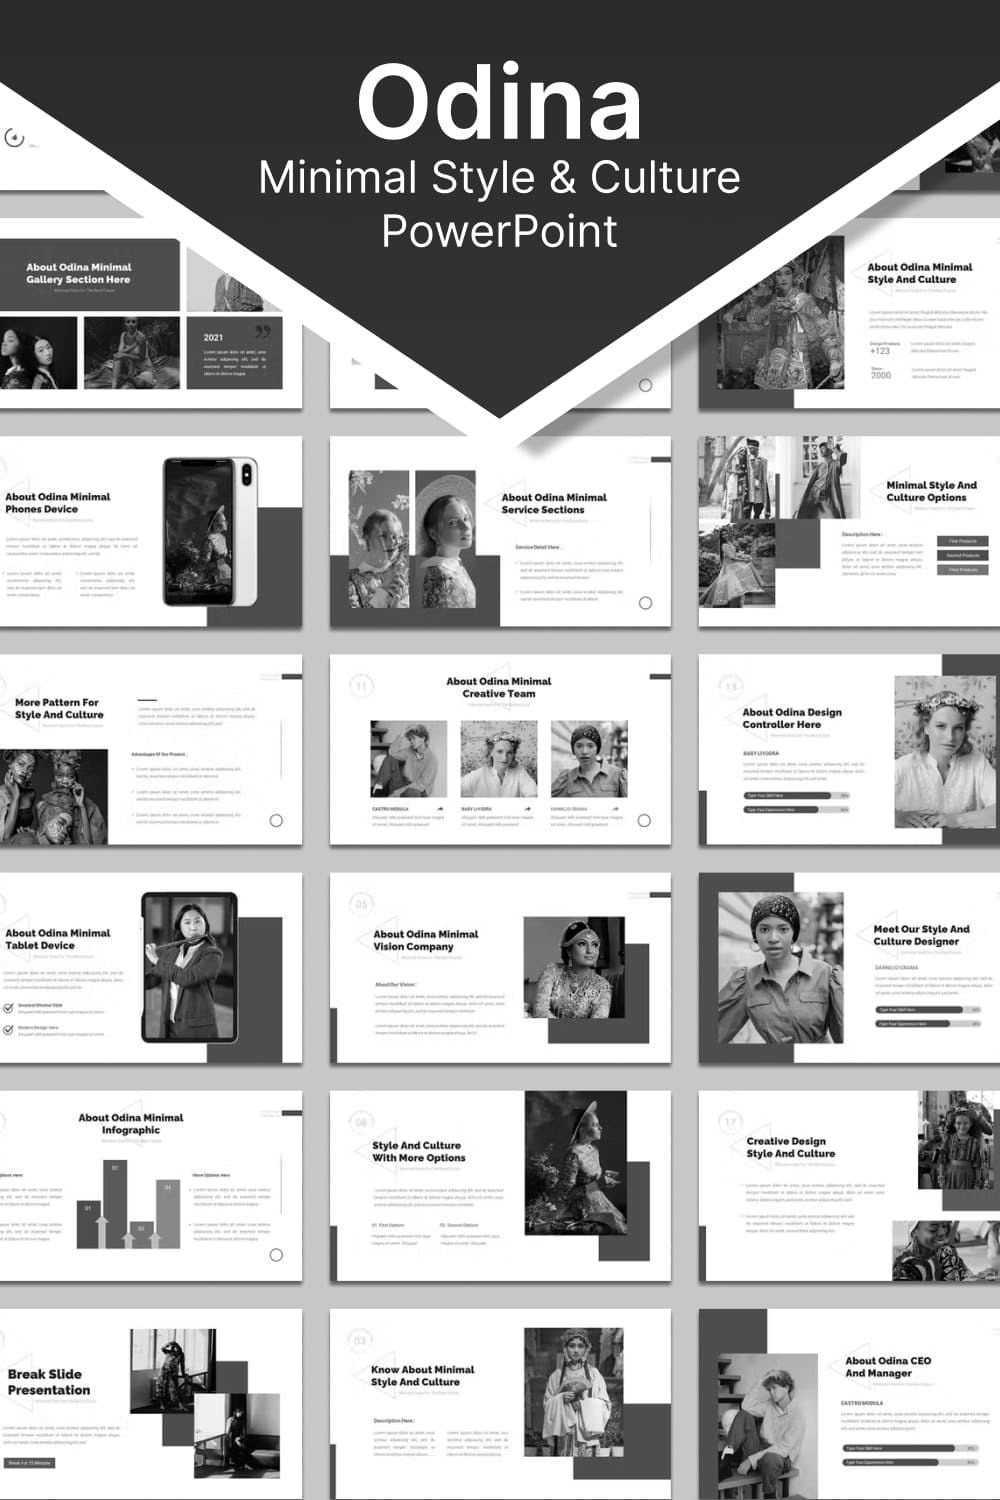 Odina minimal style culture powerpoint - pinterest image preview.